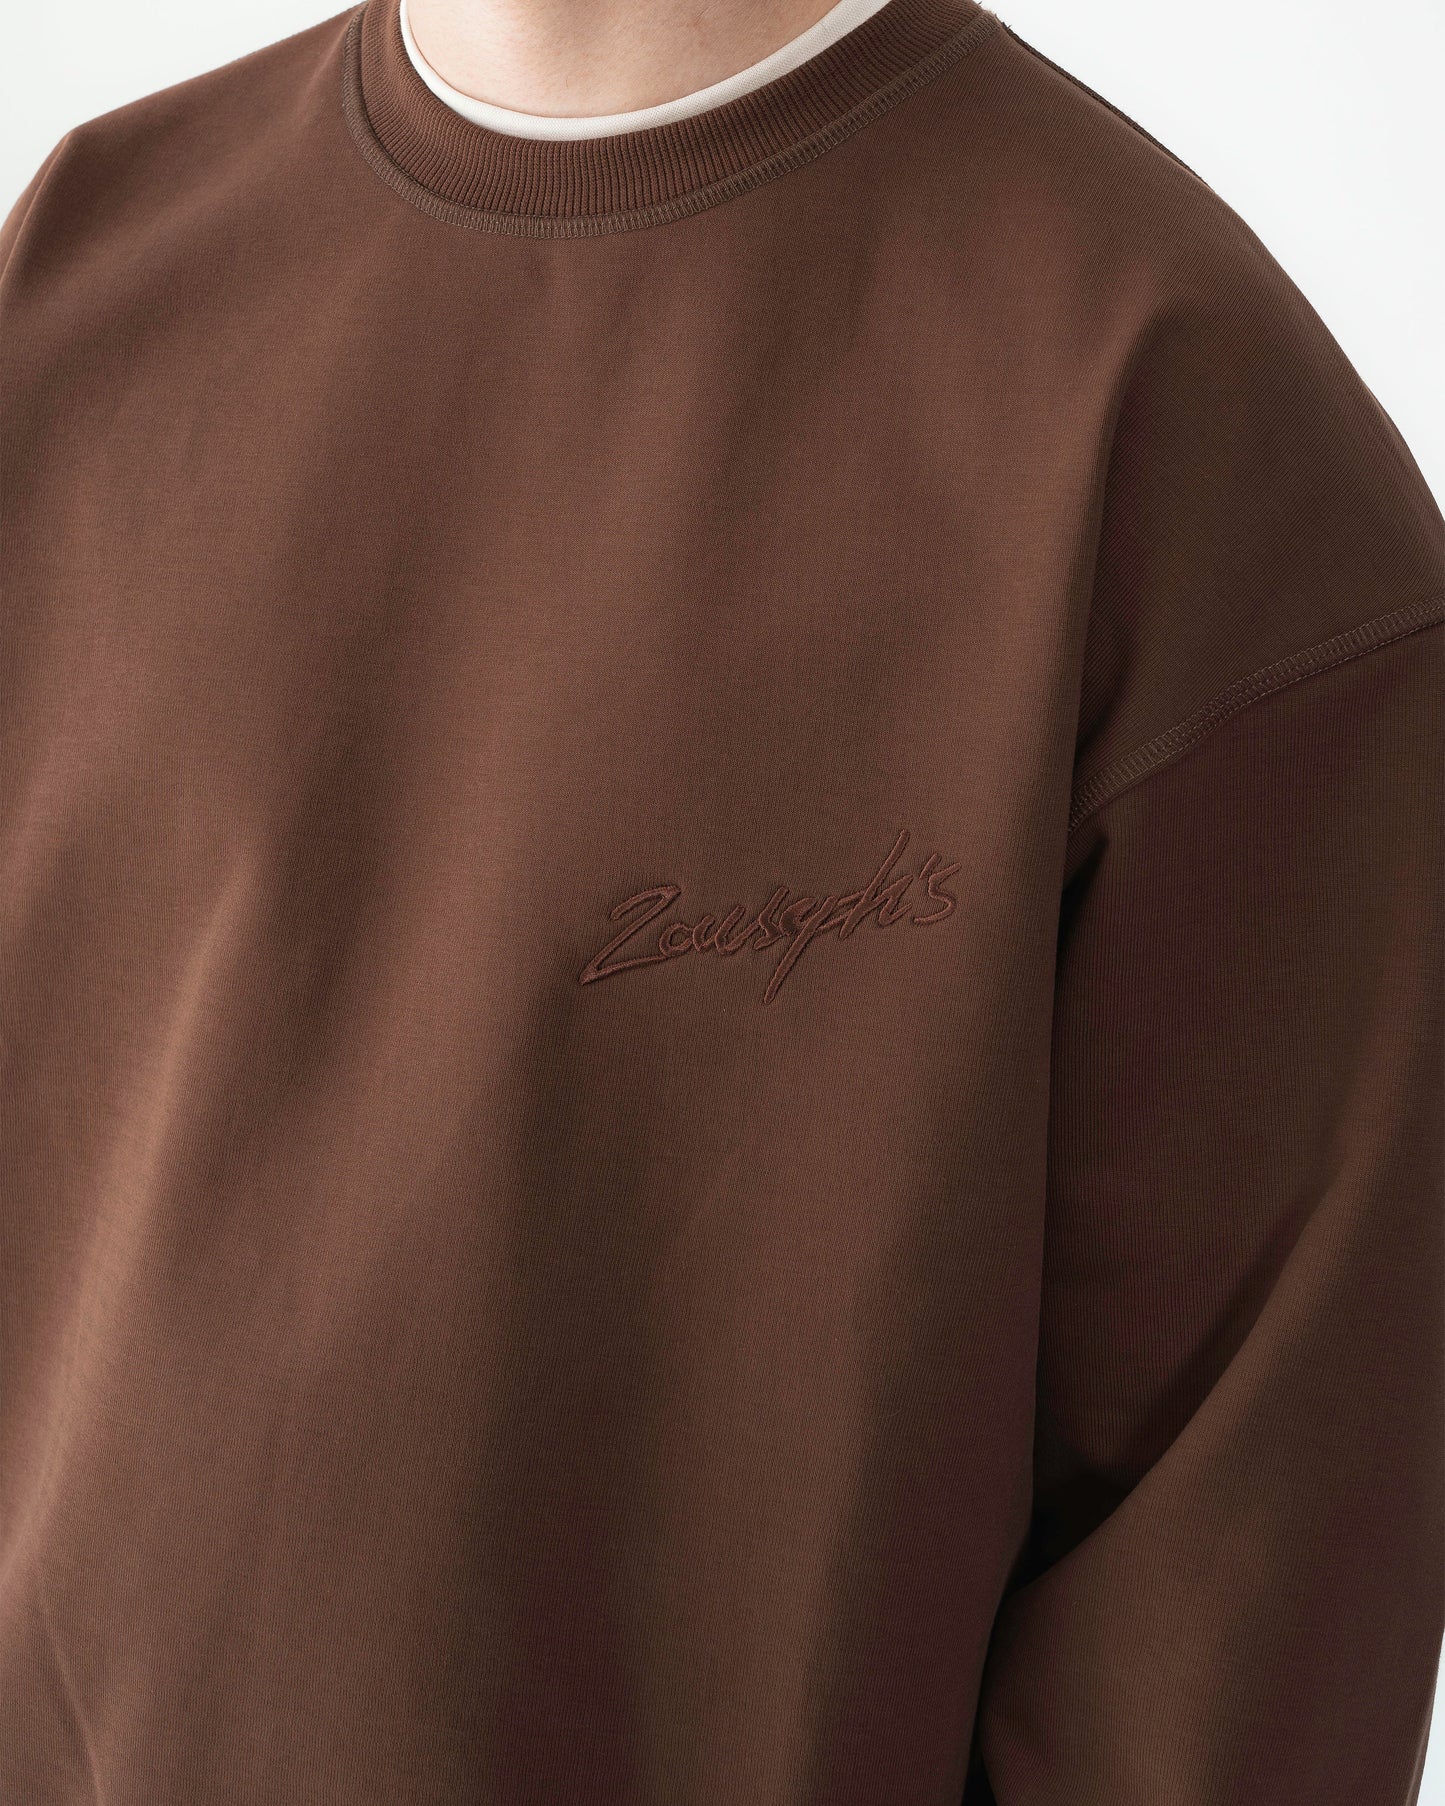 EMROIDERED SWEATER - BROWN